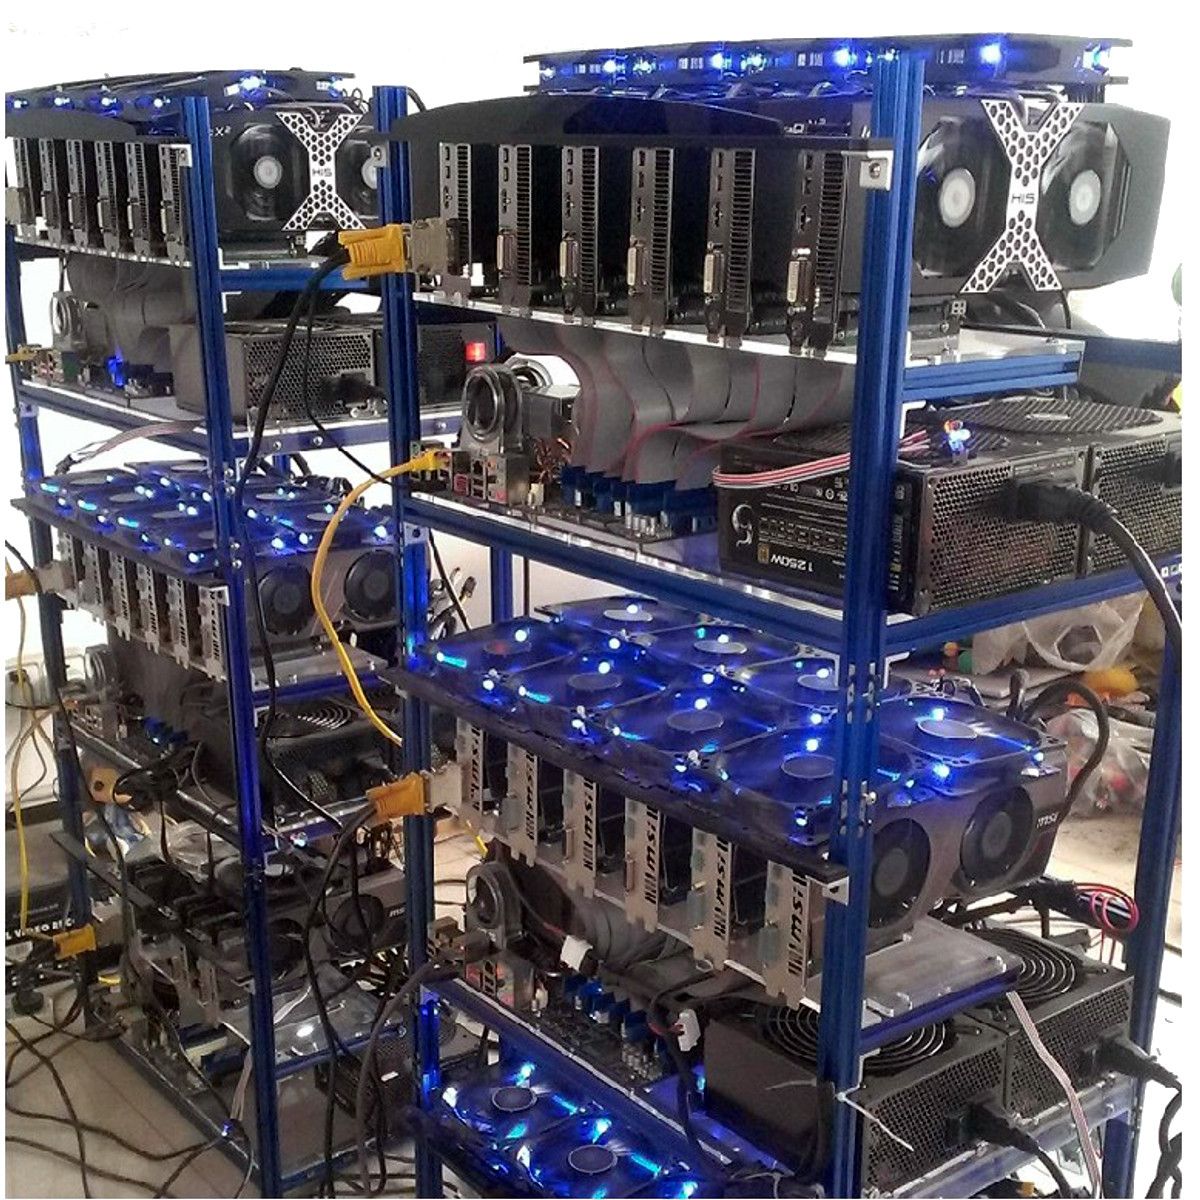 8-GPU-Aluminum-Open-Air-Miner-Frame-Mining-Rig-Case-Ethereum-ZCash-With-6-Fans-1202051